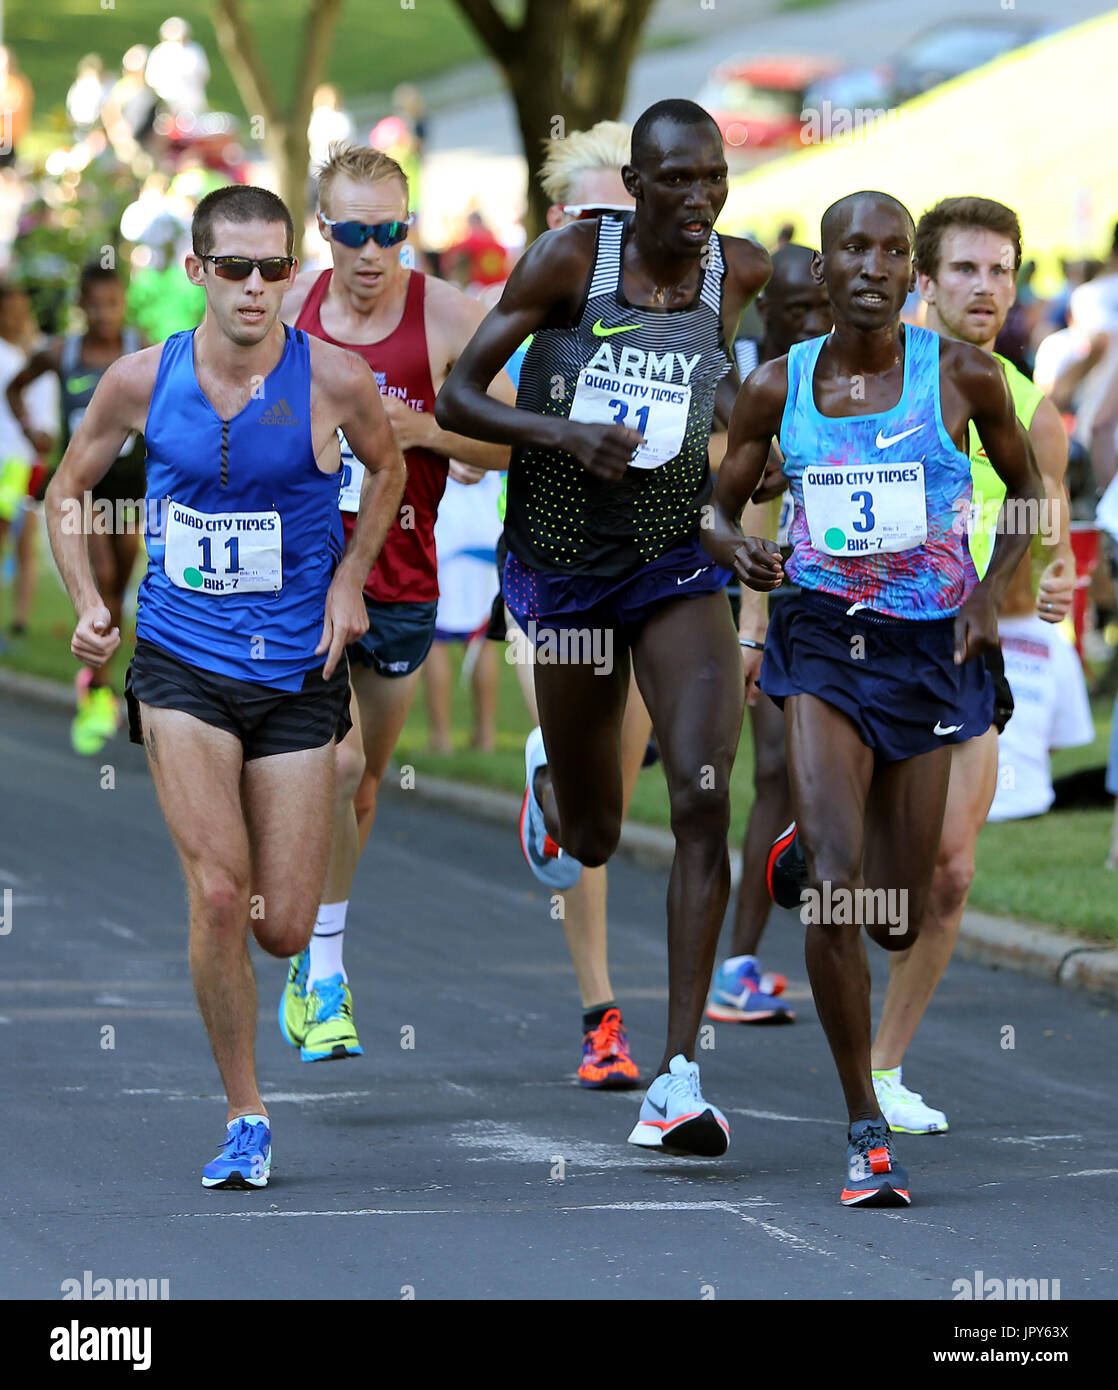 Davenport, Iowa, USA. 28th July, 2017. The lead pack sticks close to each other as they run up Kirkwood Blvd., Friday, July 28, 2017, during the 43rd annual Quad-City Times Bix 7. Credit: John Schultz/Quad-City Times/ZUMA Wire/Alamy Live News Stock Photo